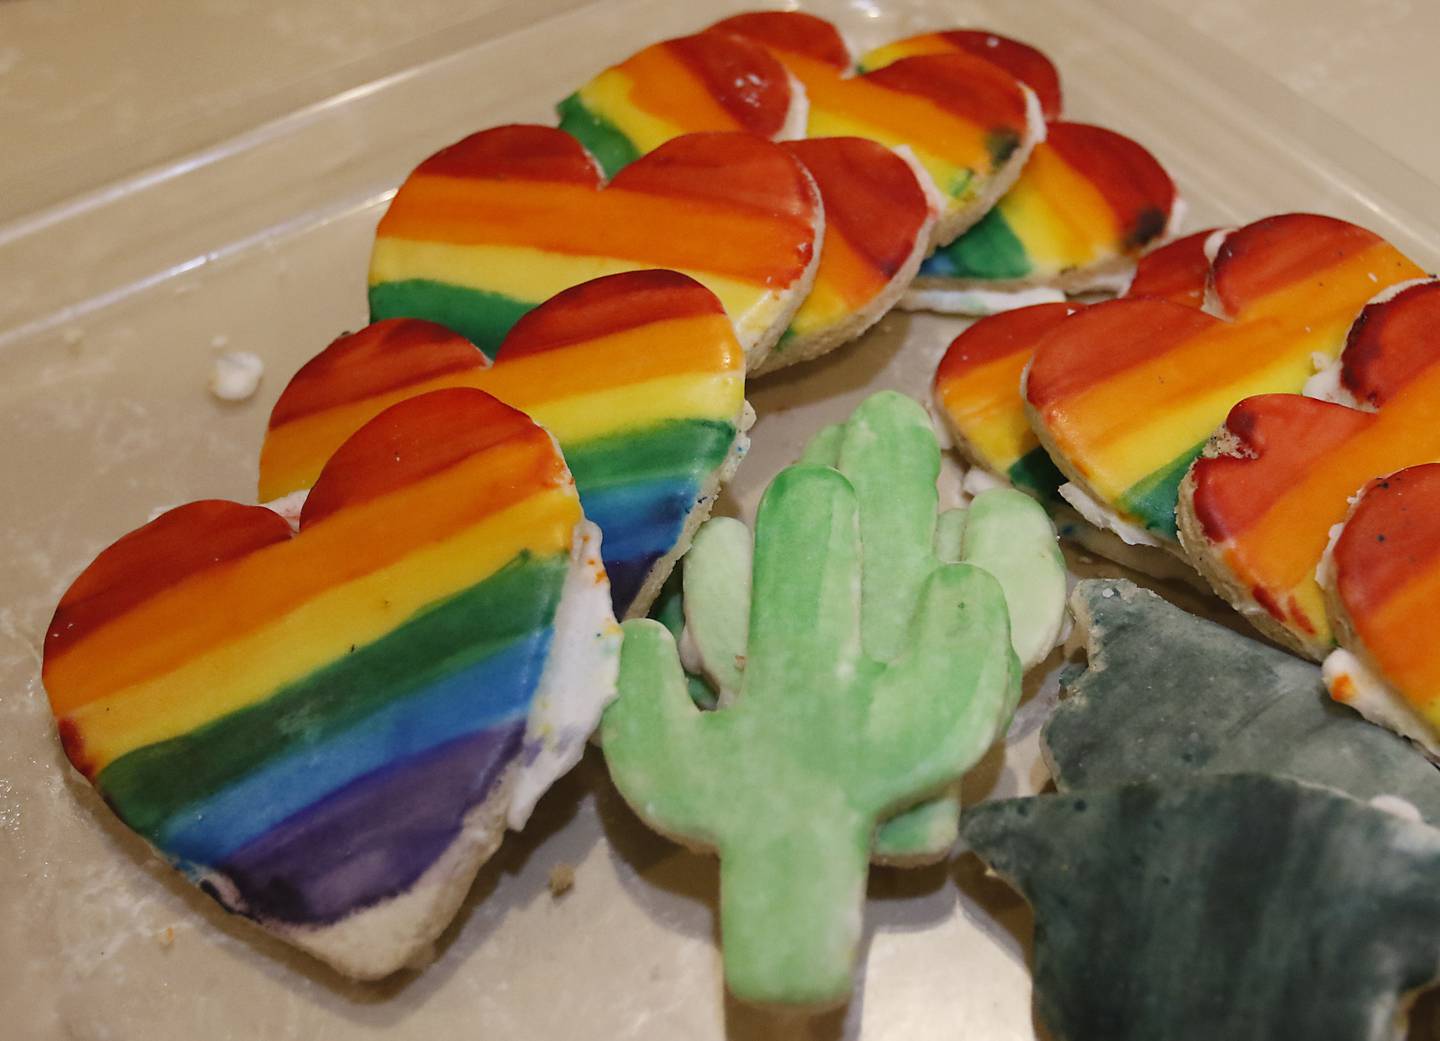 Rainbow heart cookies for sale at Uprising Bakery and Cafe, 2104 Algonquin Road, in Lake in the Hills, on Thursday, July 14, 2022, UpRising, after announcing a drag show for Saturday, July 23, has faced an incredible amount of harassment and opposition.